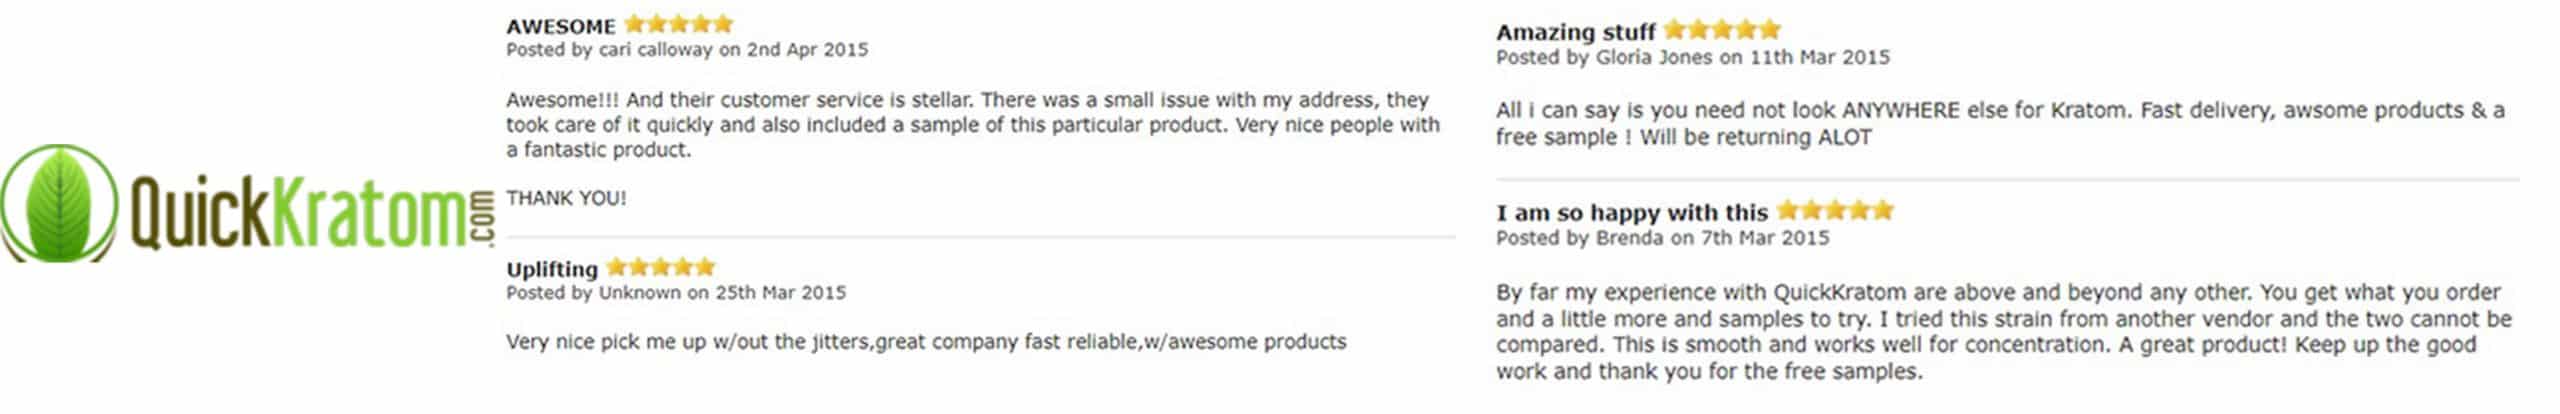 image of quick kratom products reviews